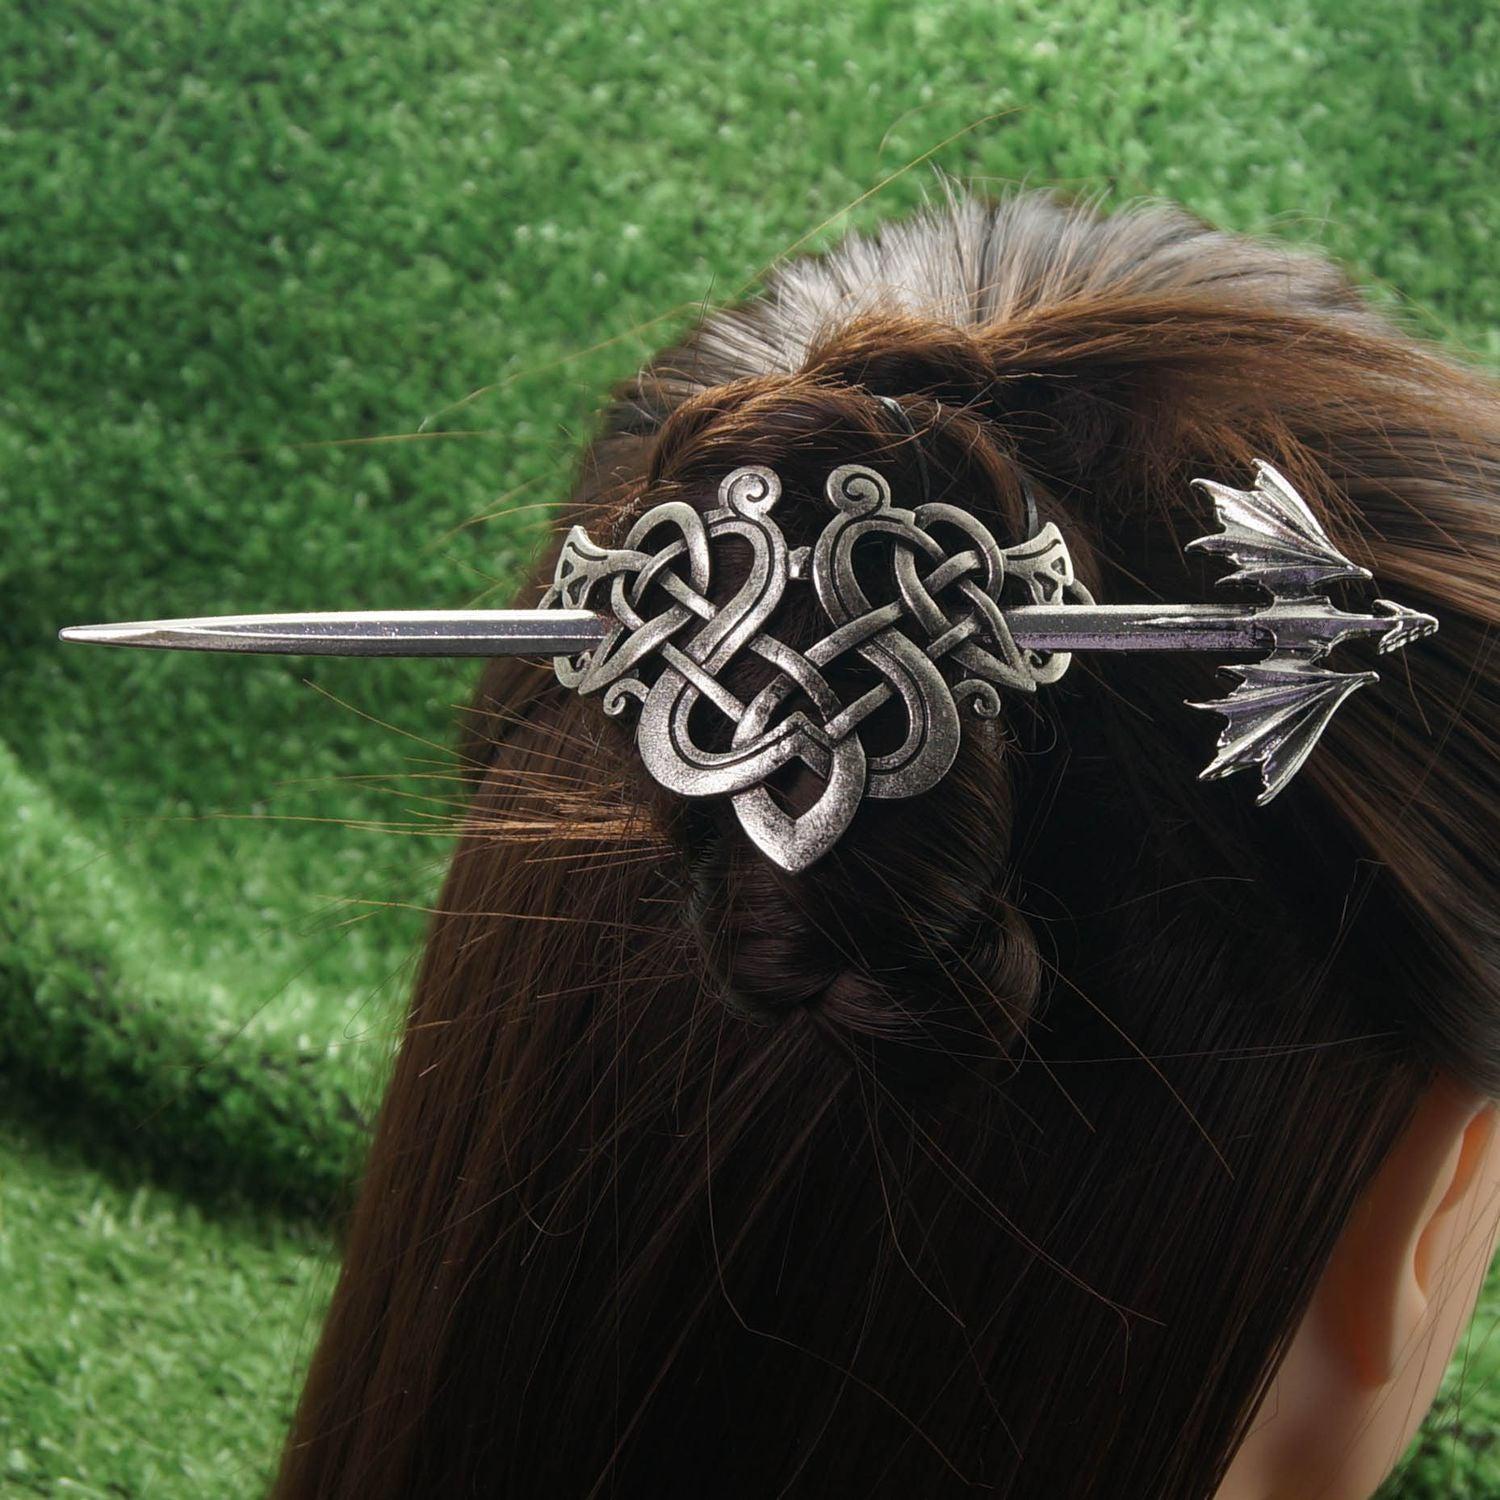 Wicca Celtic Hair Pin Pagan Hair Accessories-MoonChildWorld